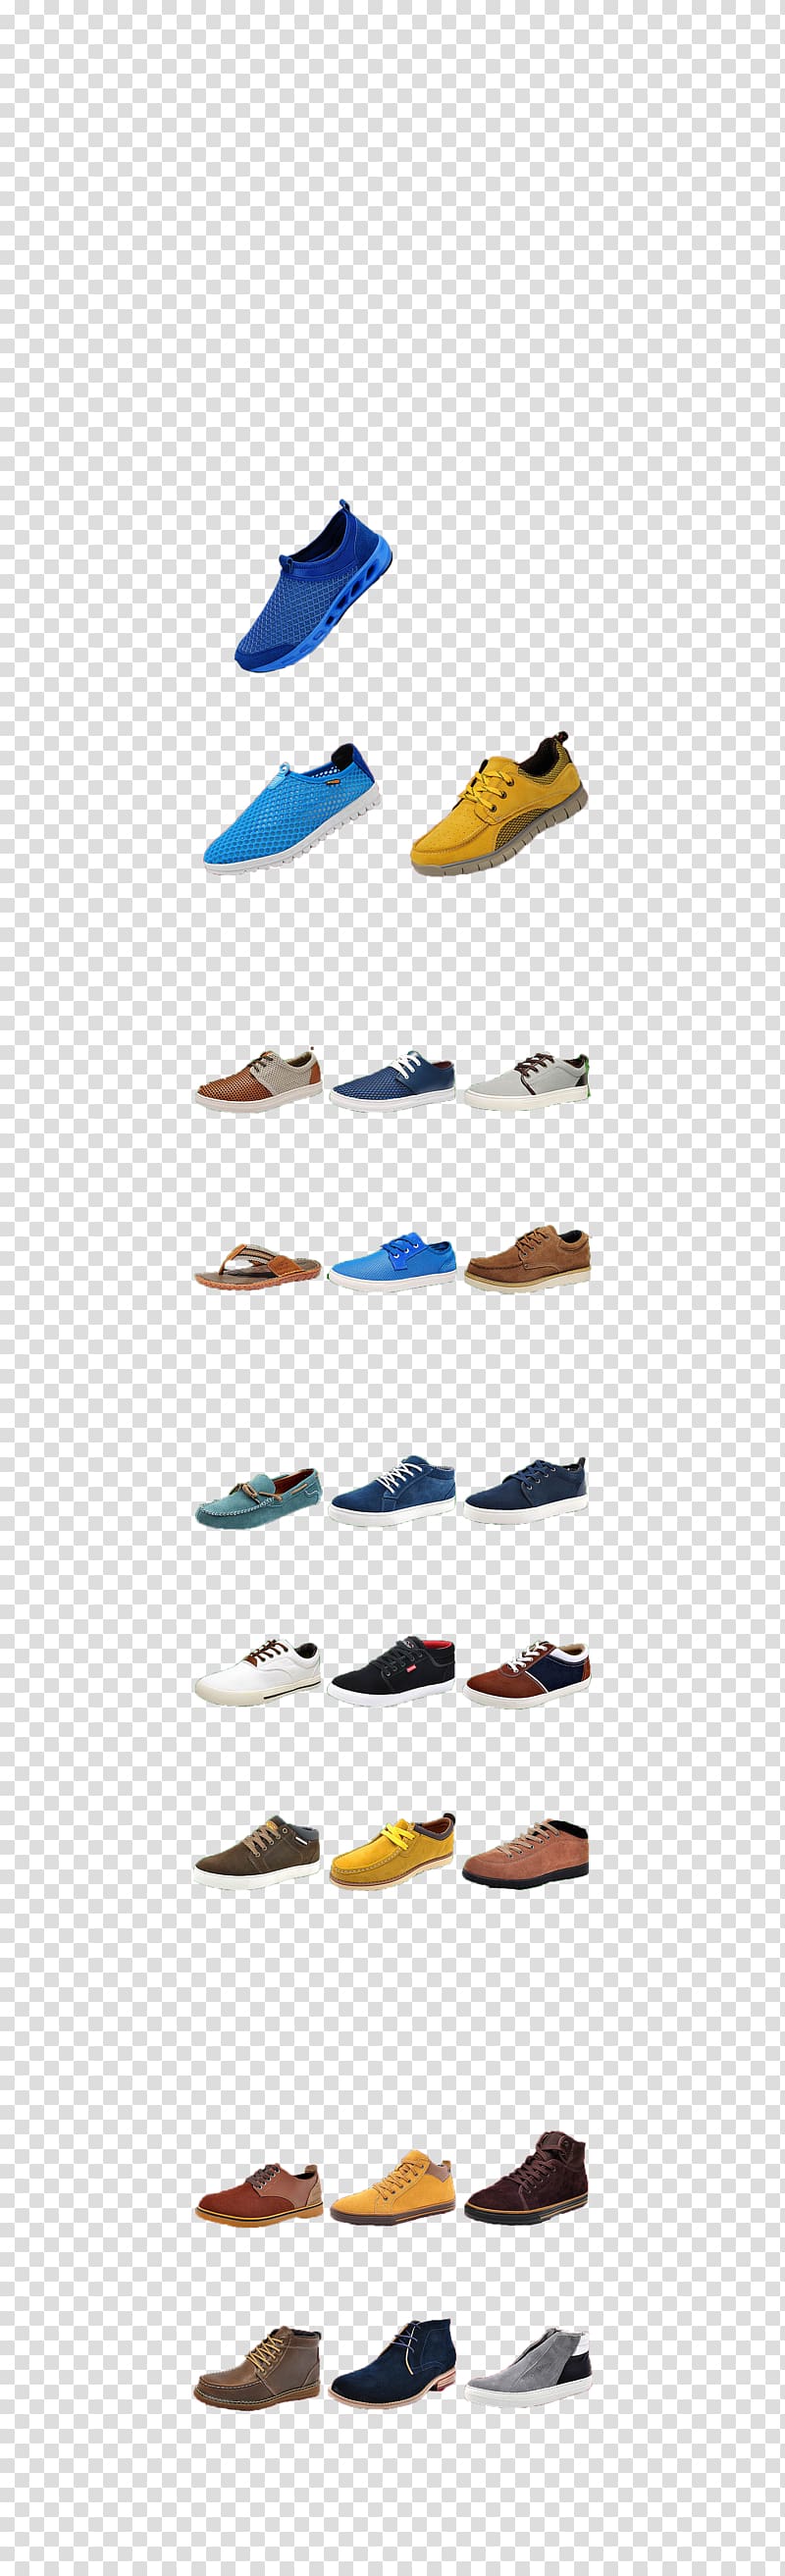 Sneakers Shoe Footwear, sports shoes transparent background PNG clipart